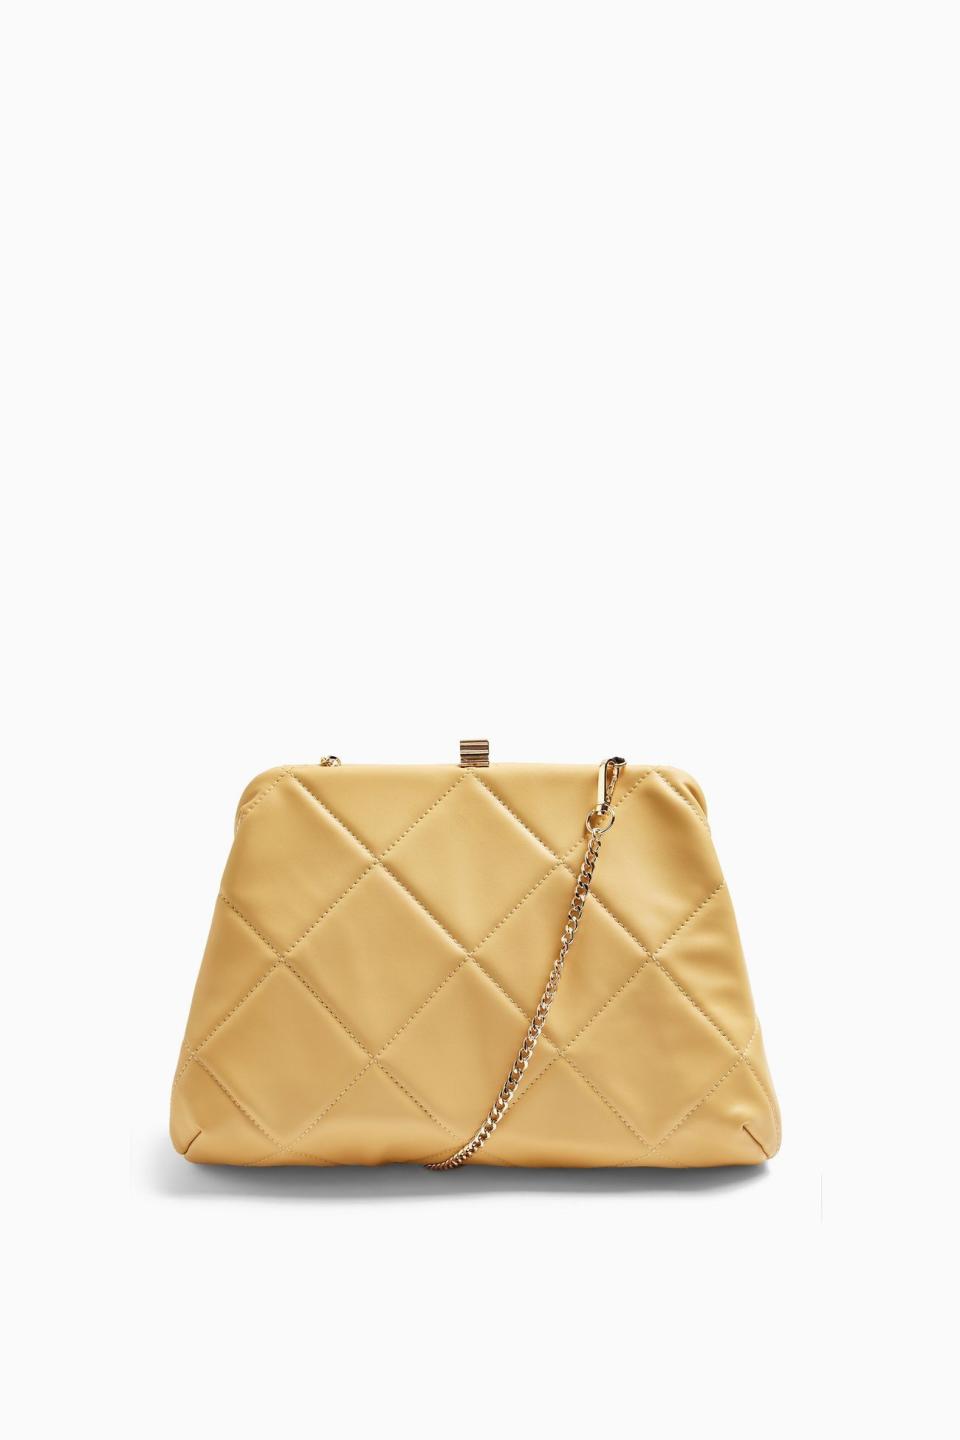 14) Oversized Quilted Clutch Bag